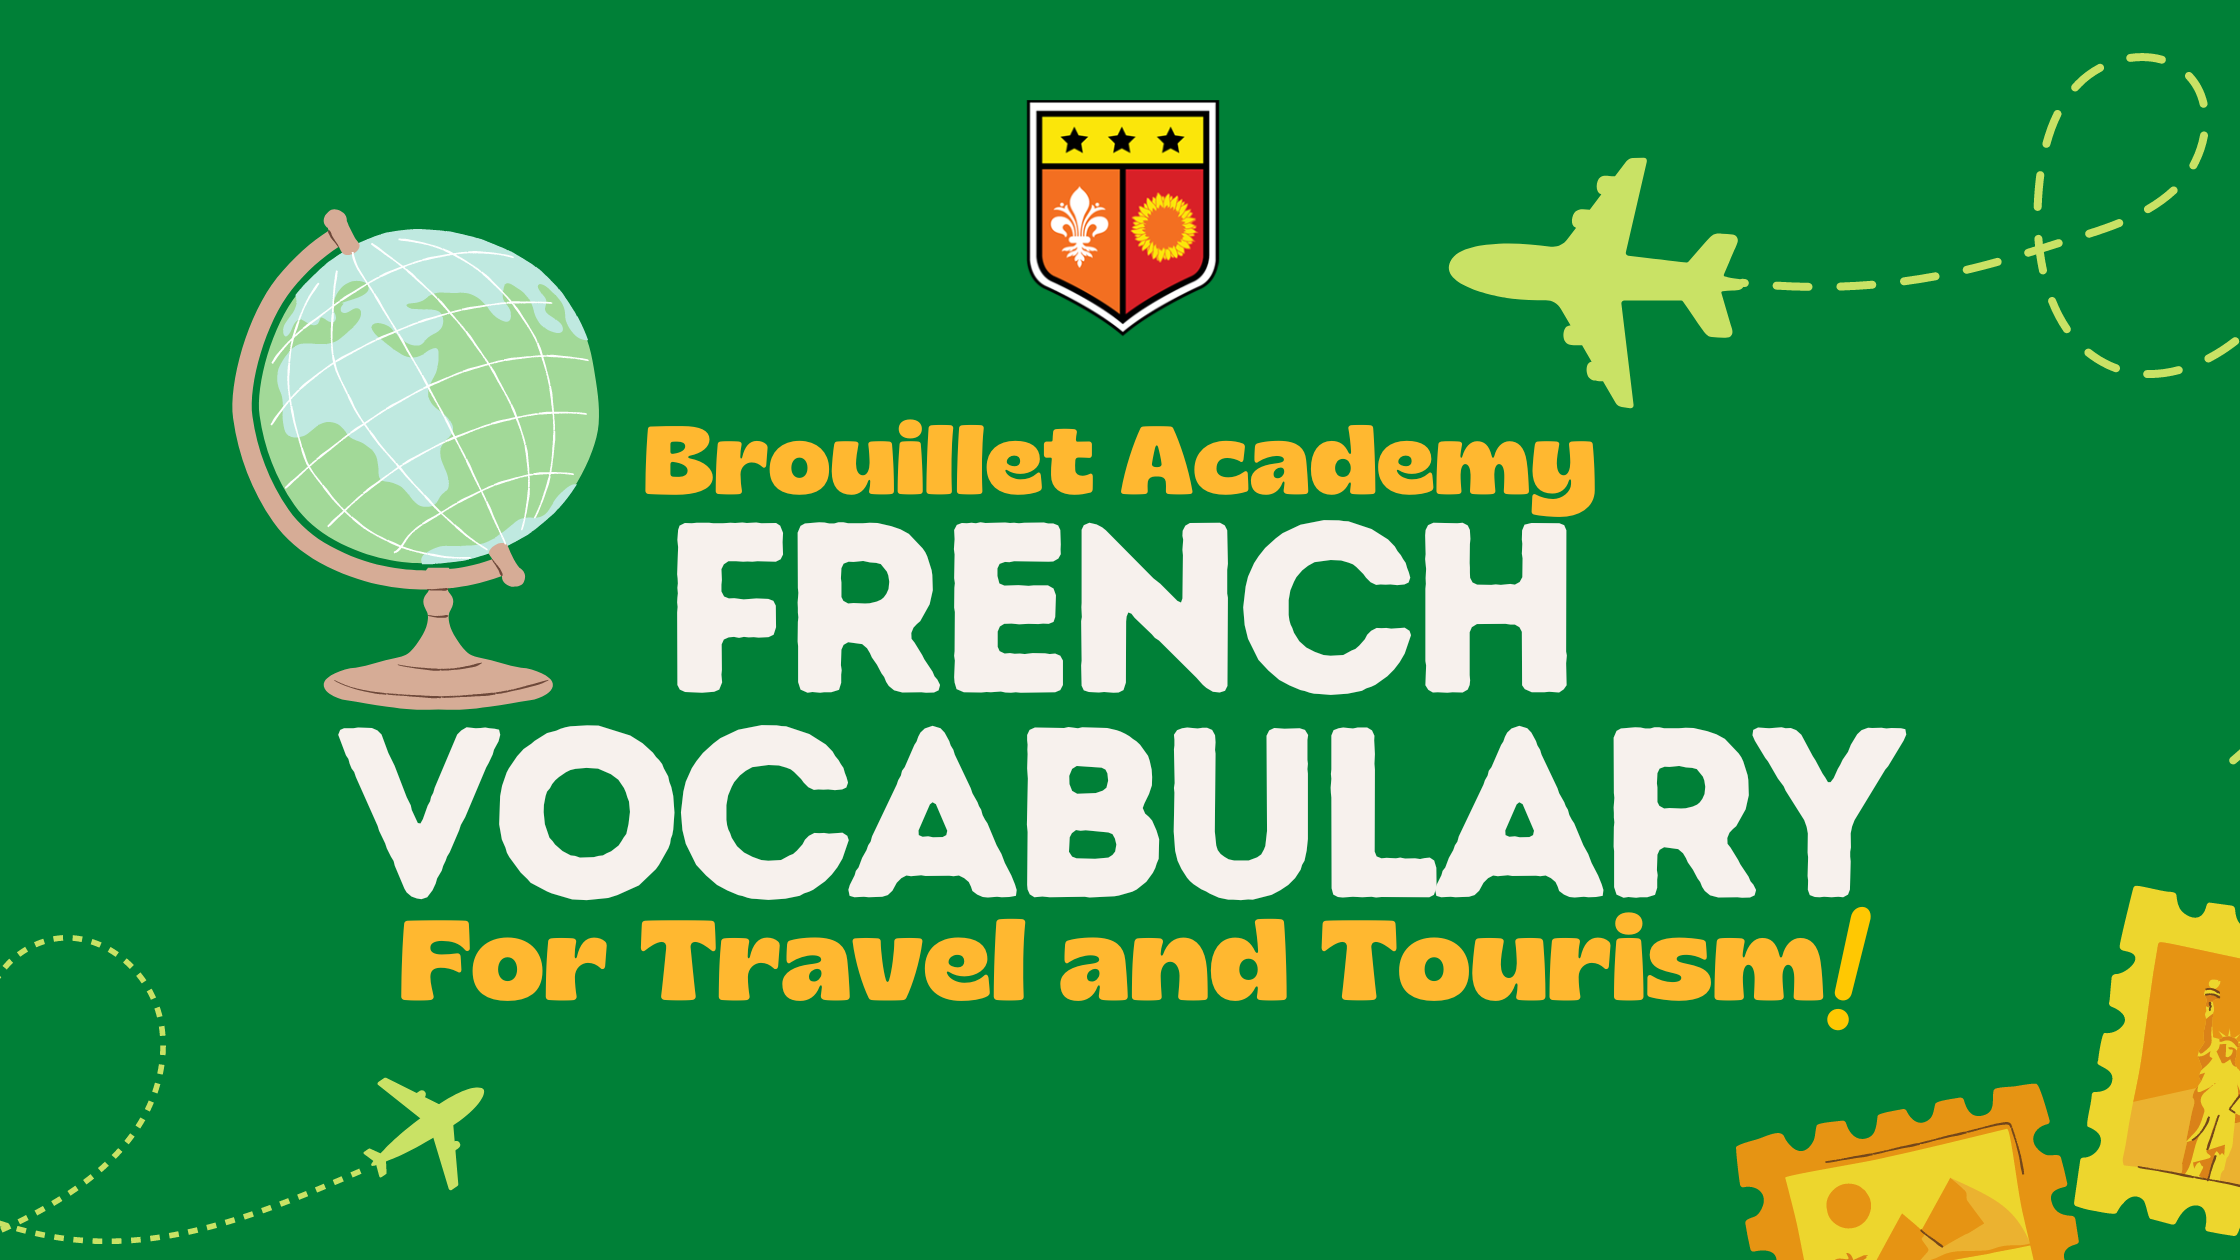 French vocabulary for travel featured image